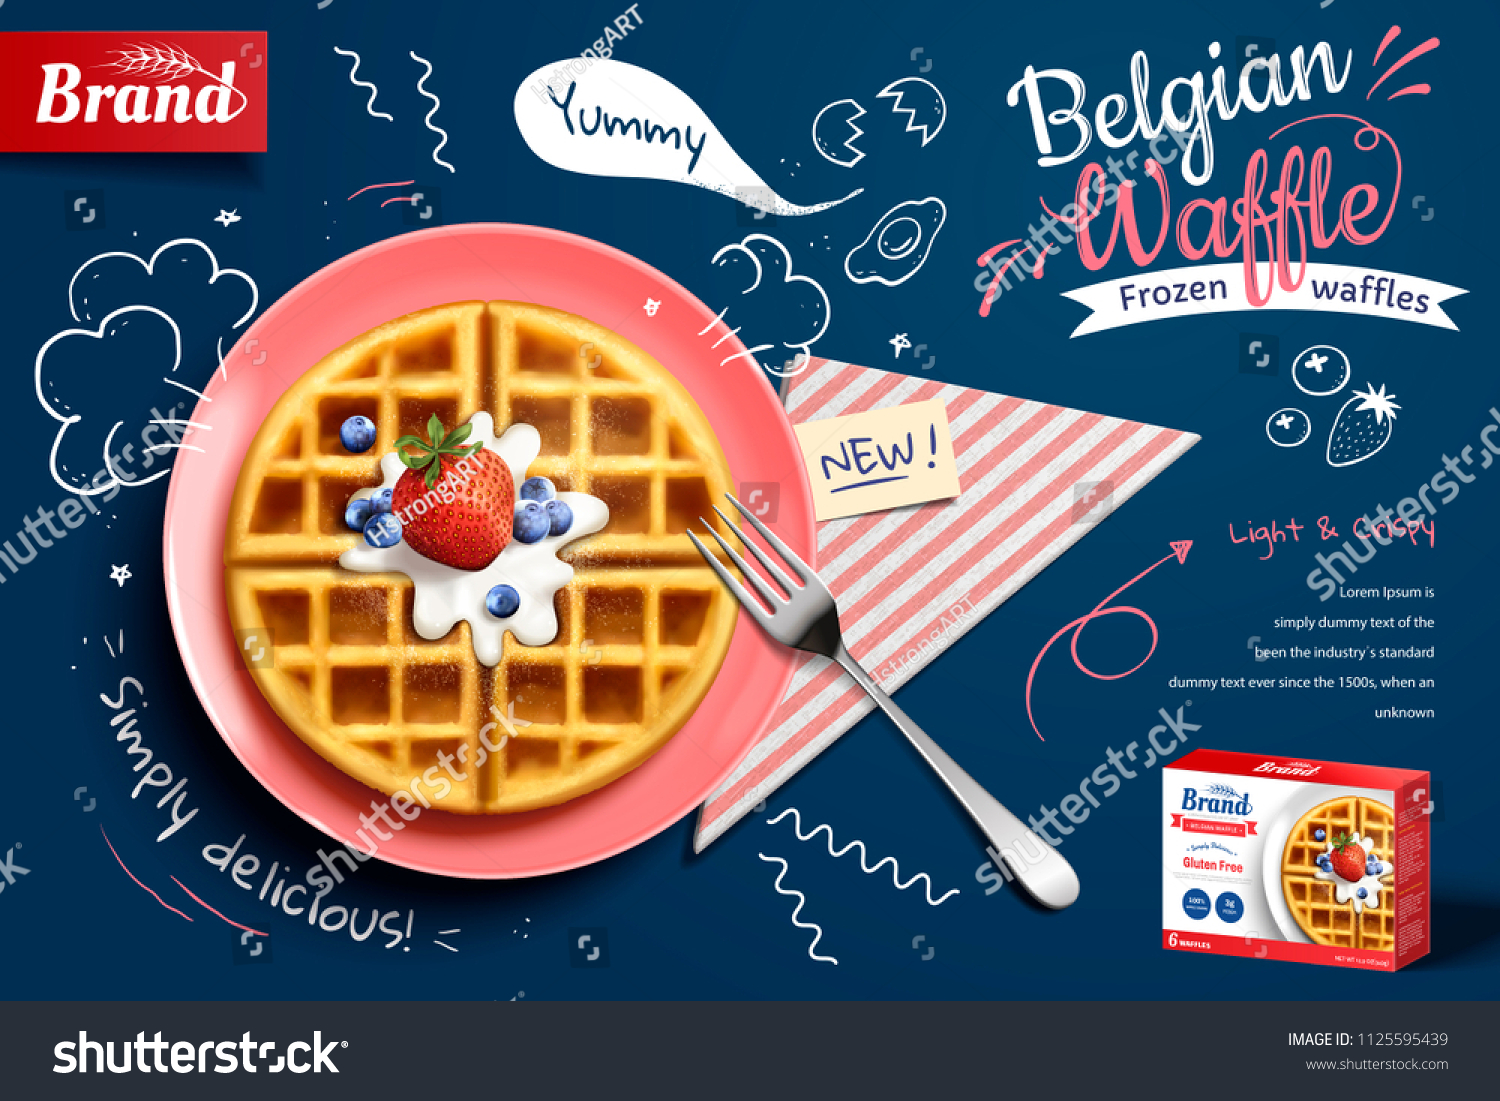 Belgian waffle ads with delicious fruit and cream in 3d illustration on blue doodle background, top view #1125595439